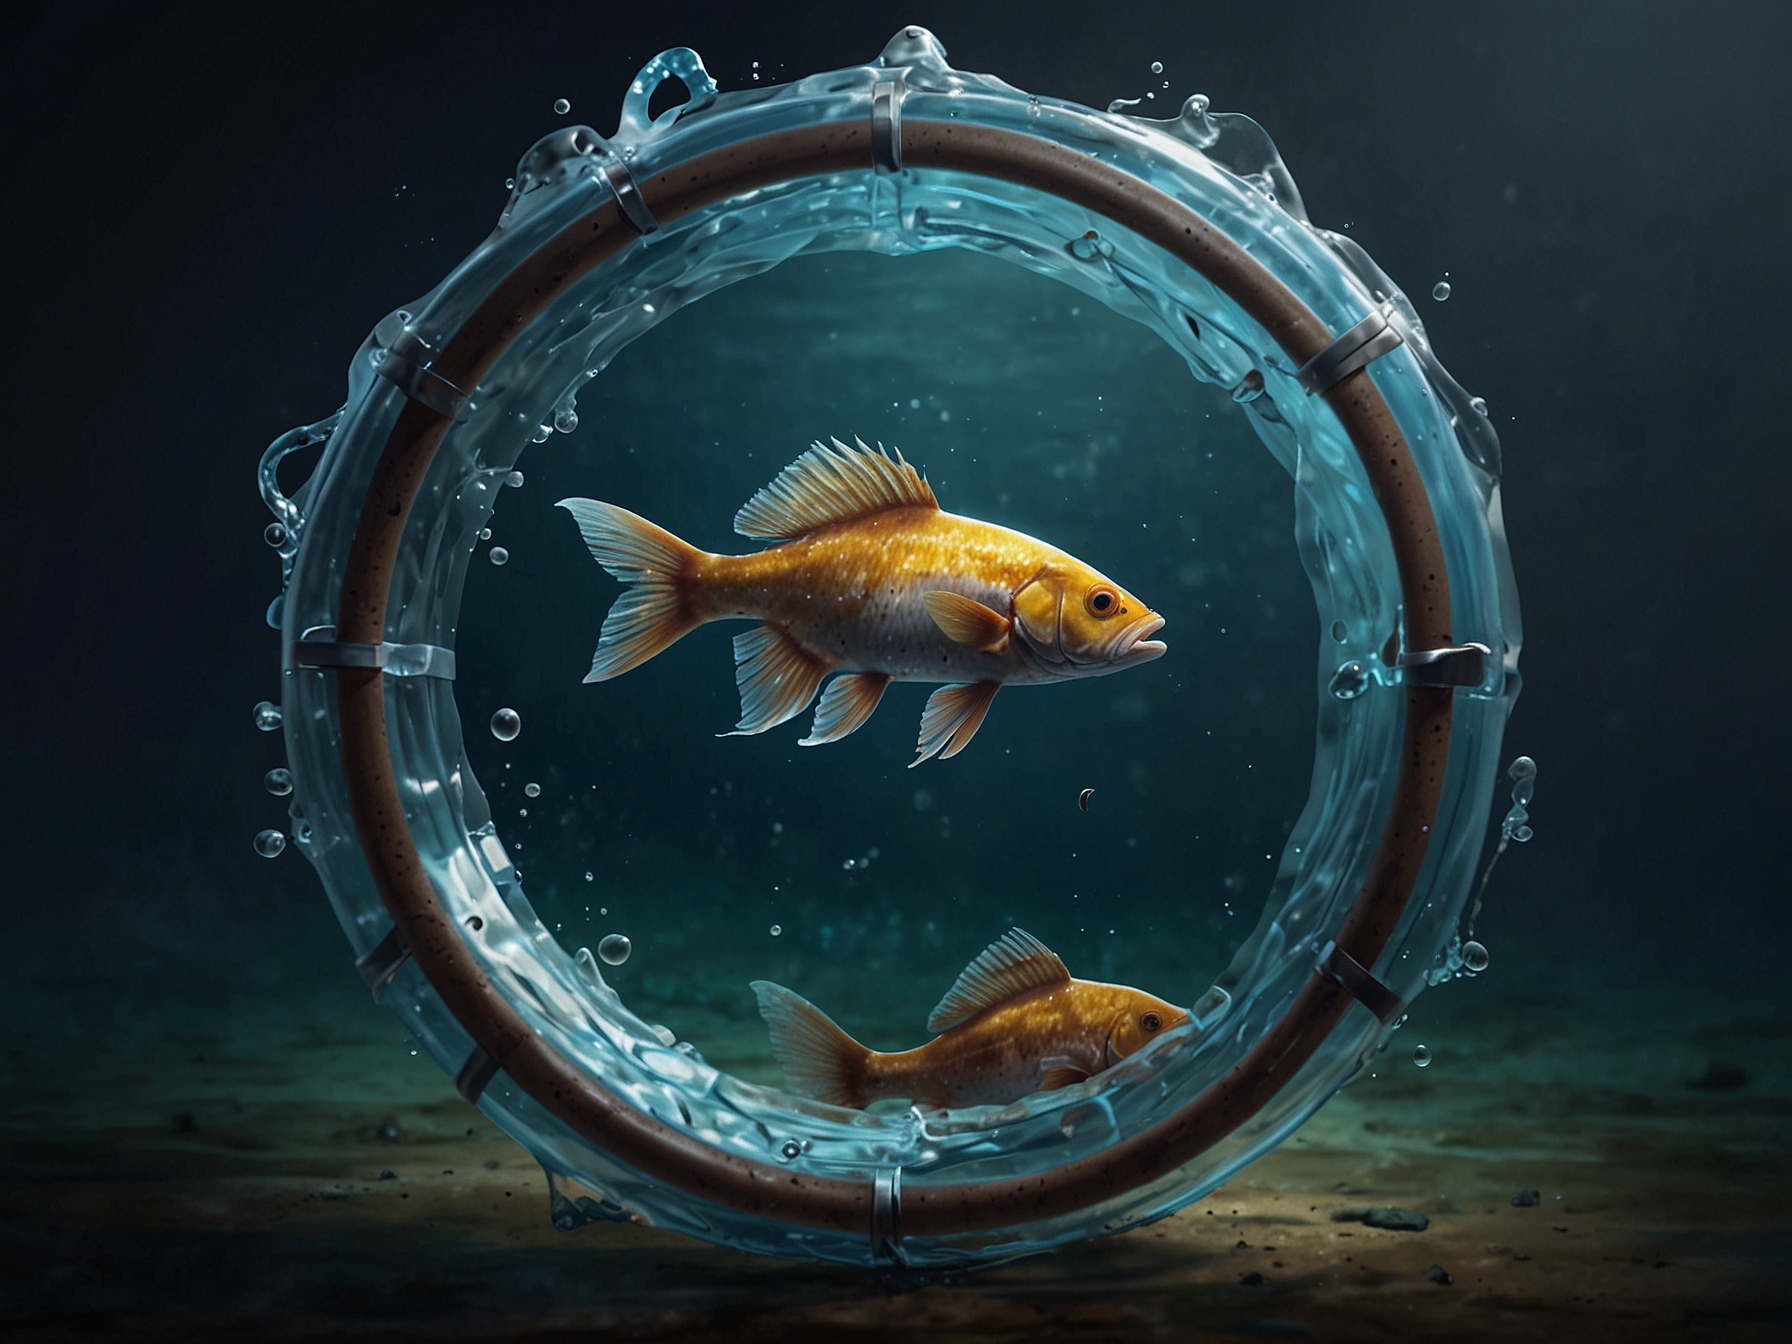 An image showing a fish trapped in a plastic 6-pack ring, illustrating the severe threat these rings pose to marine animals. The fish's movement is restricted, showcasing the dangers of plastic waste in oceans.